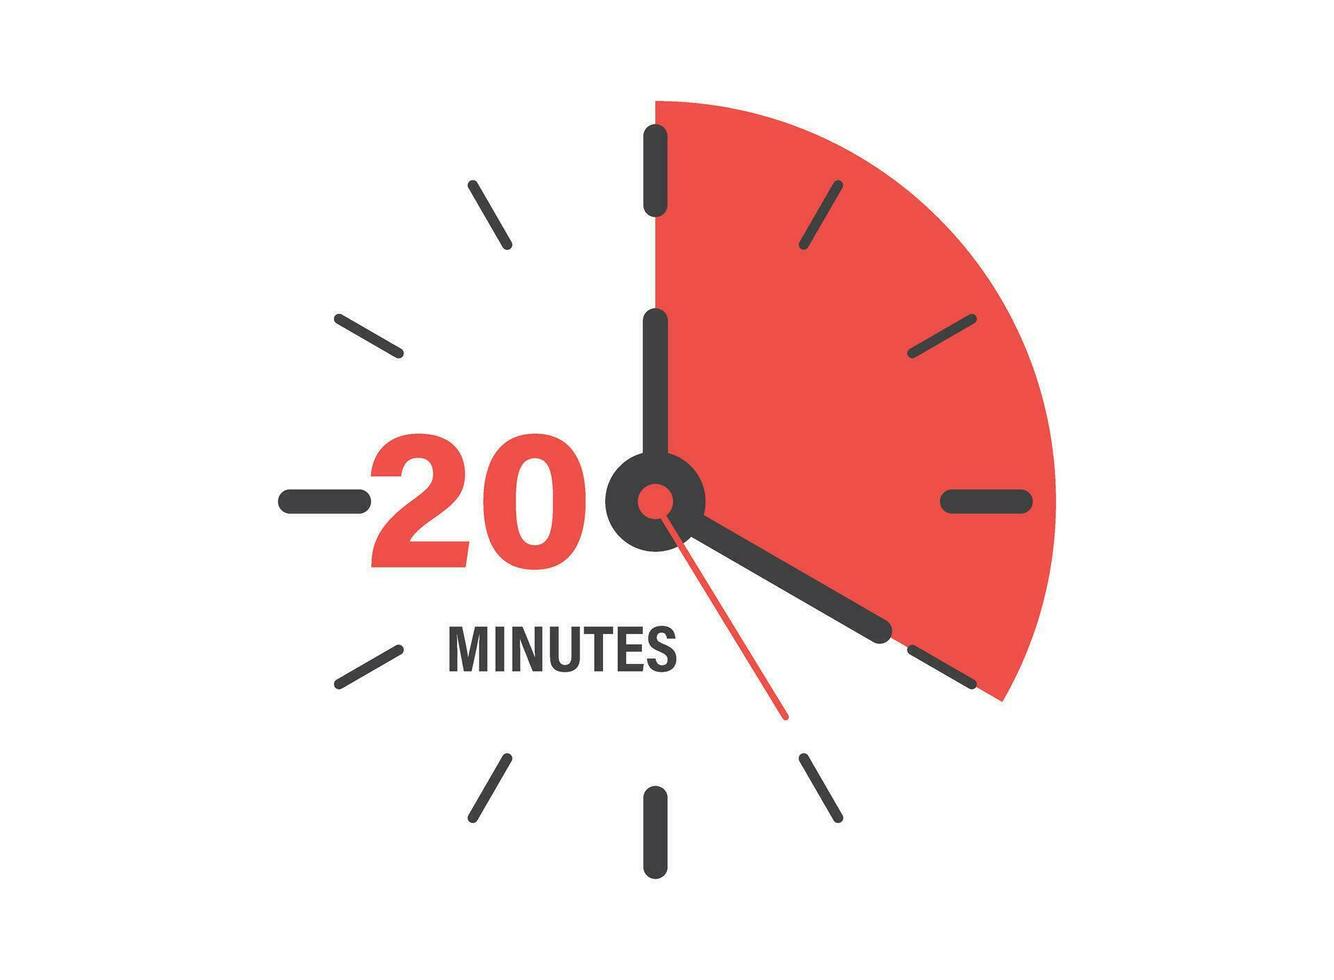 20 minutes on stopwatch icon in flat style. Clock face timer vector illustration on isolated background. Countdown sign business concept.